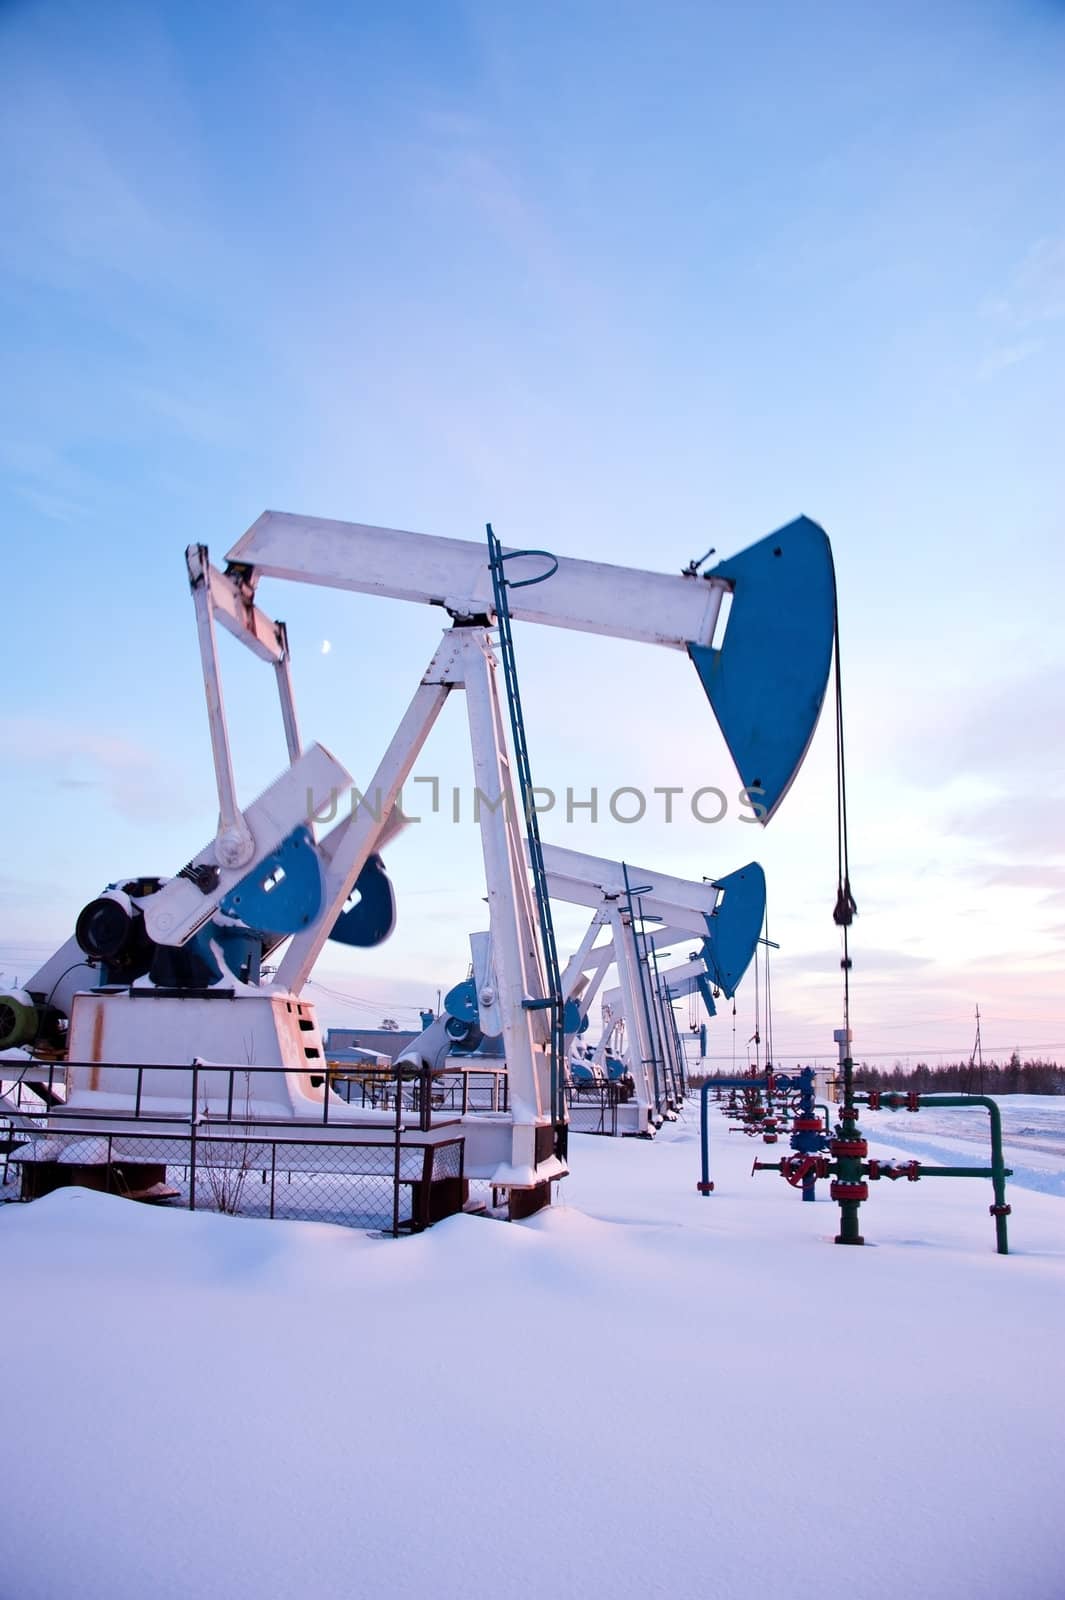 oil pumps on the sunset sky background